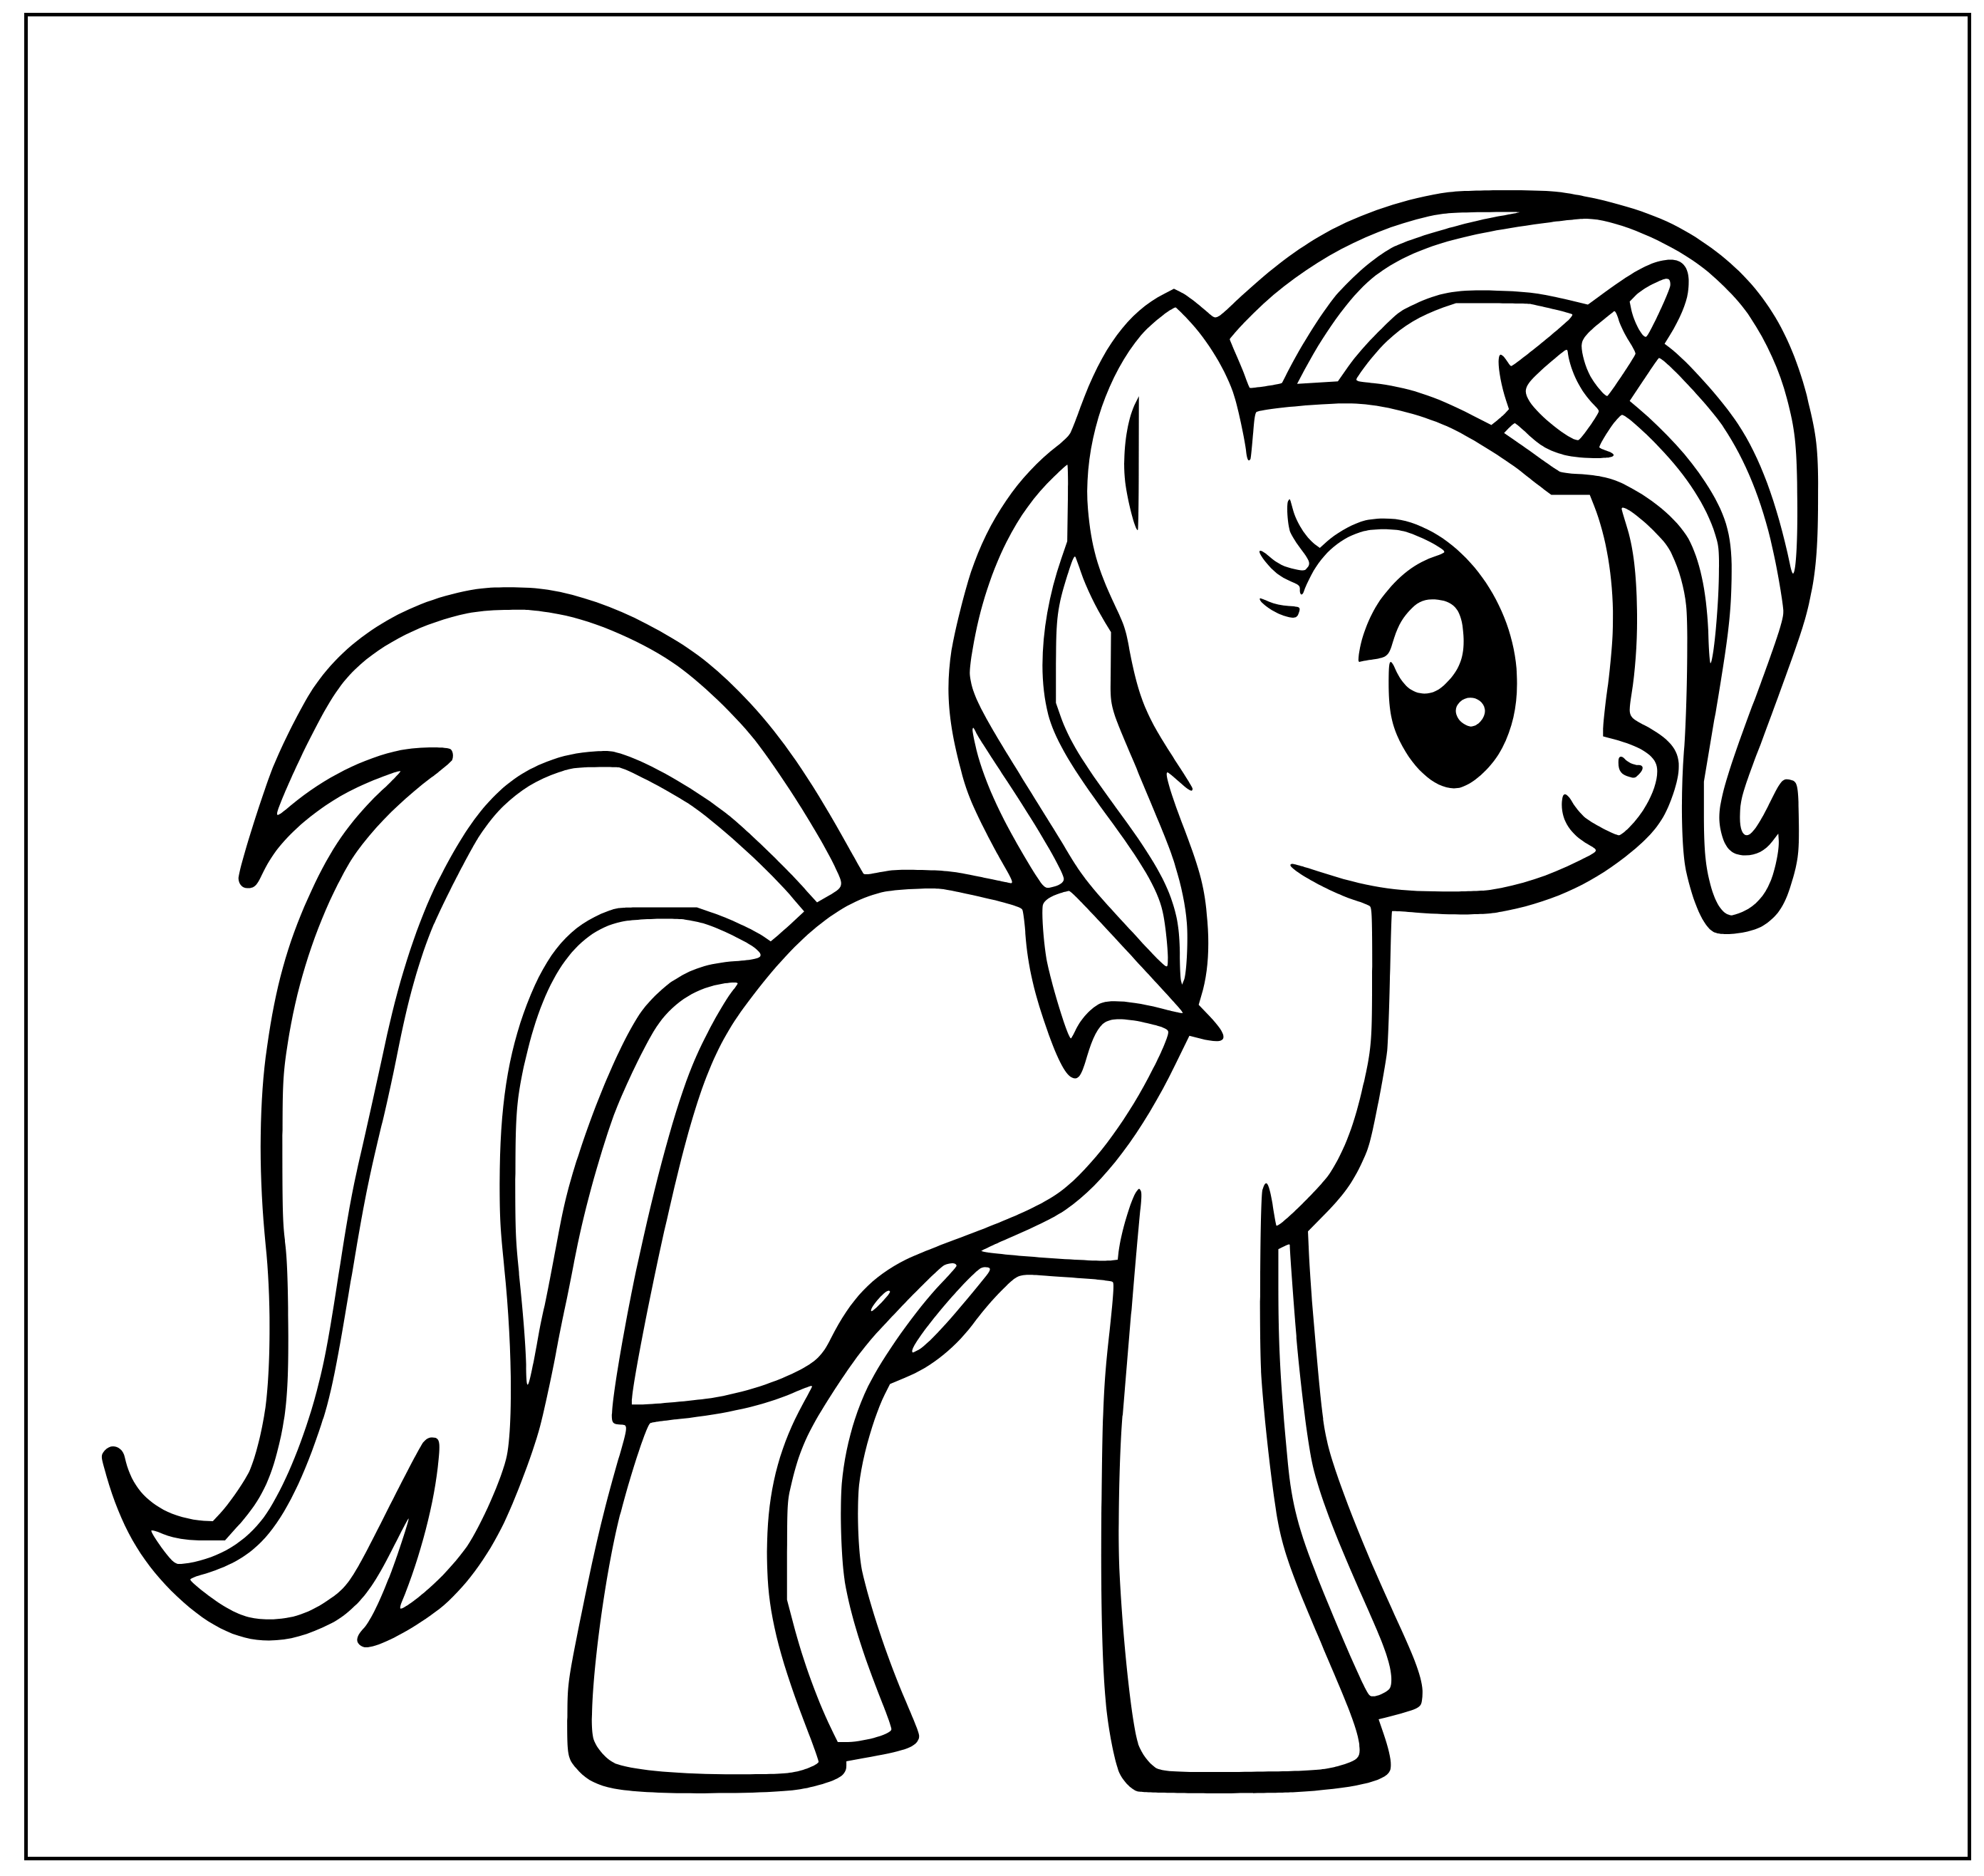 Printable Trixie MLP  sheet Coloring Page for kids.